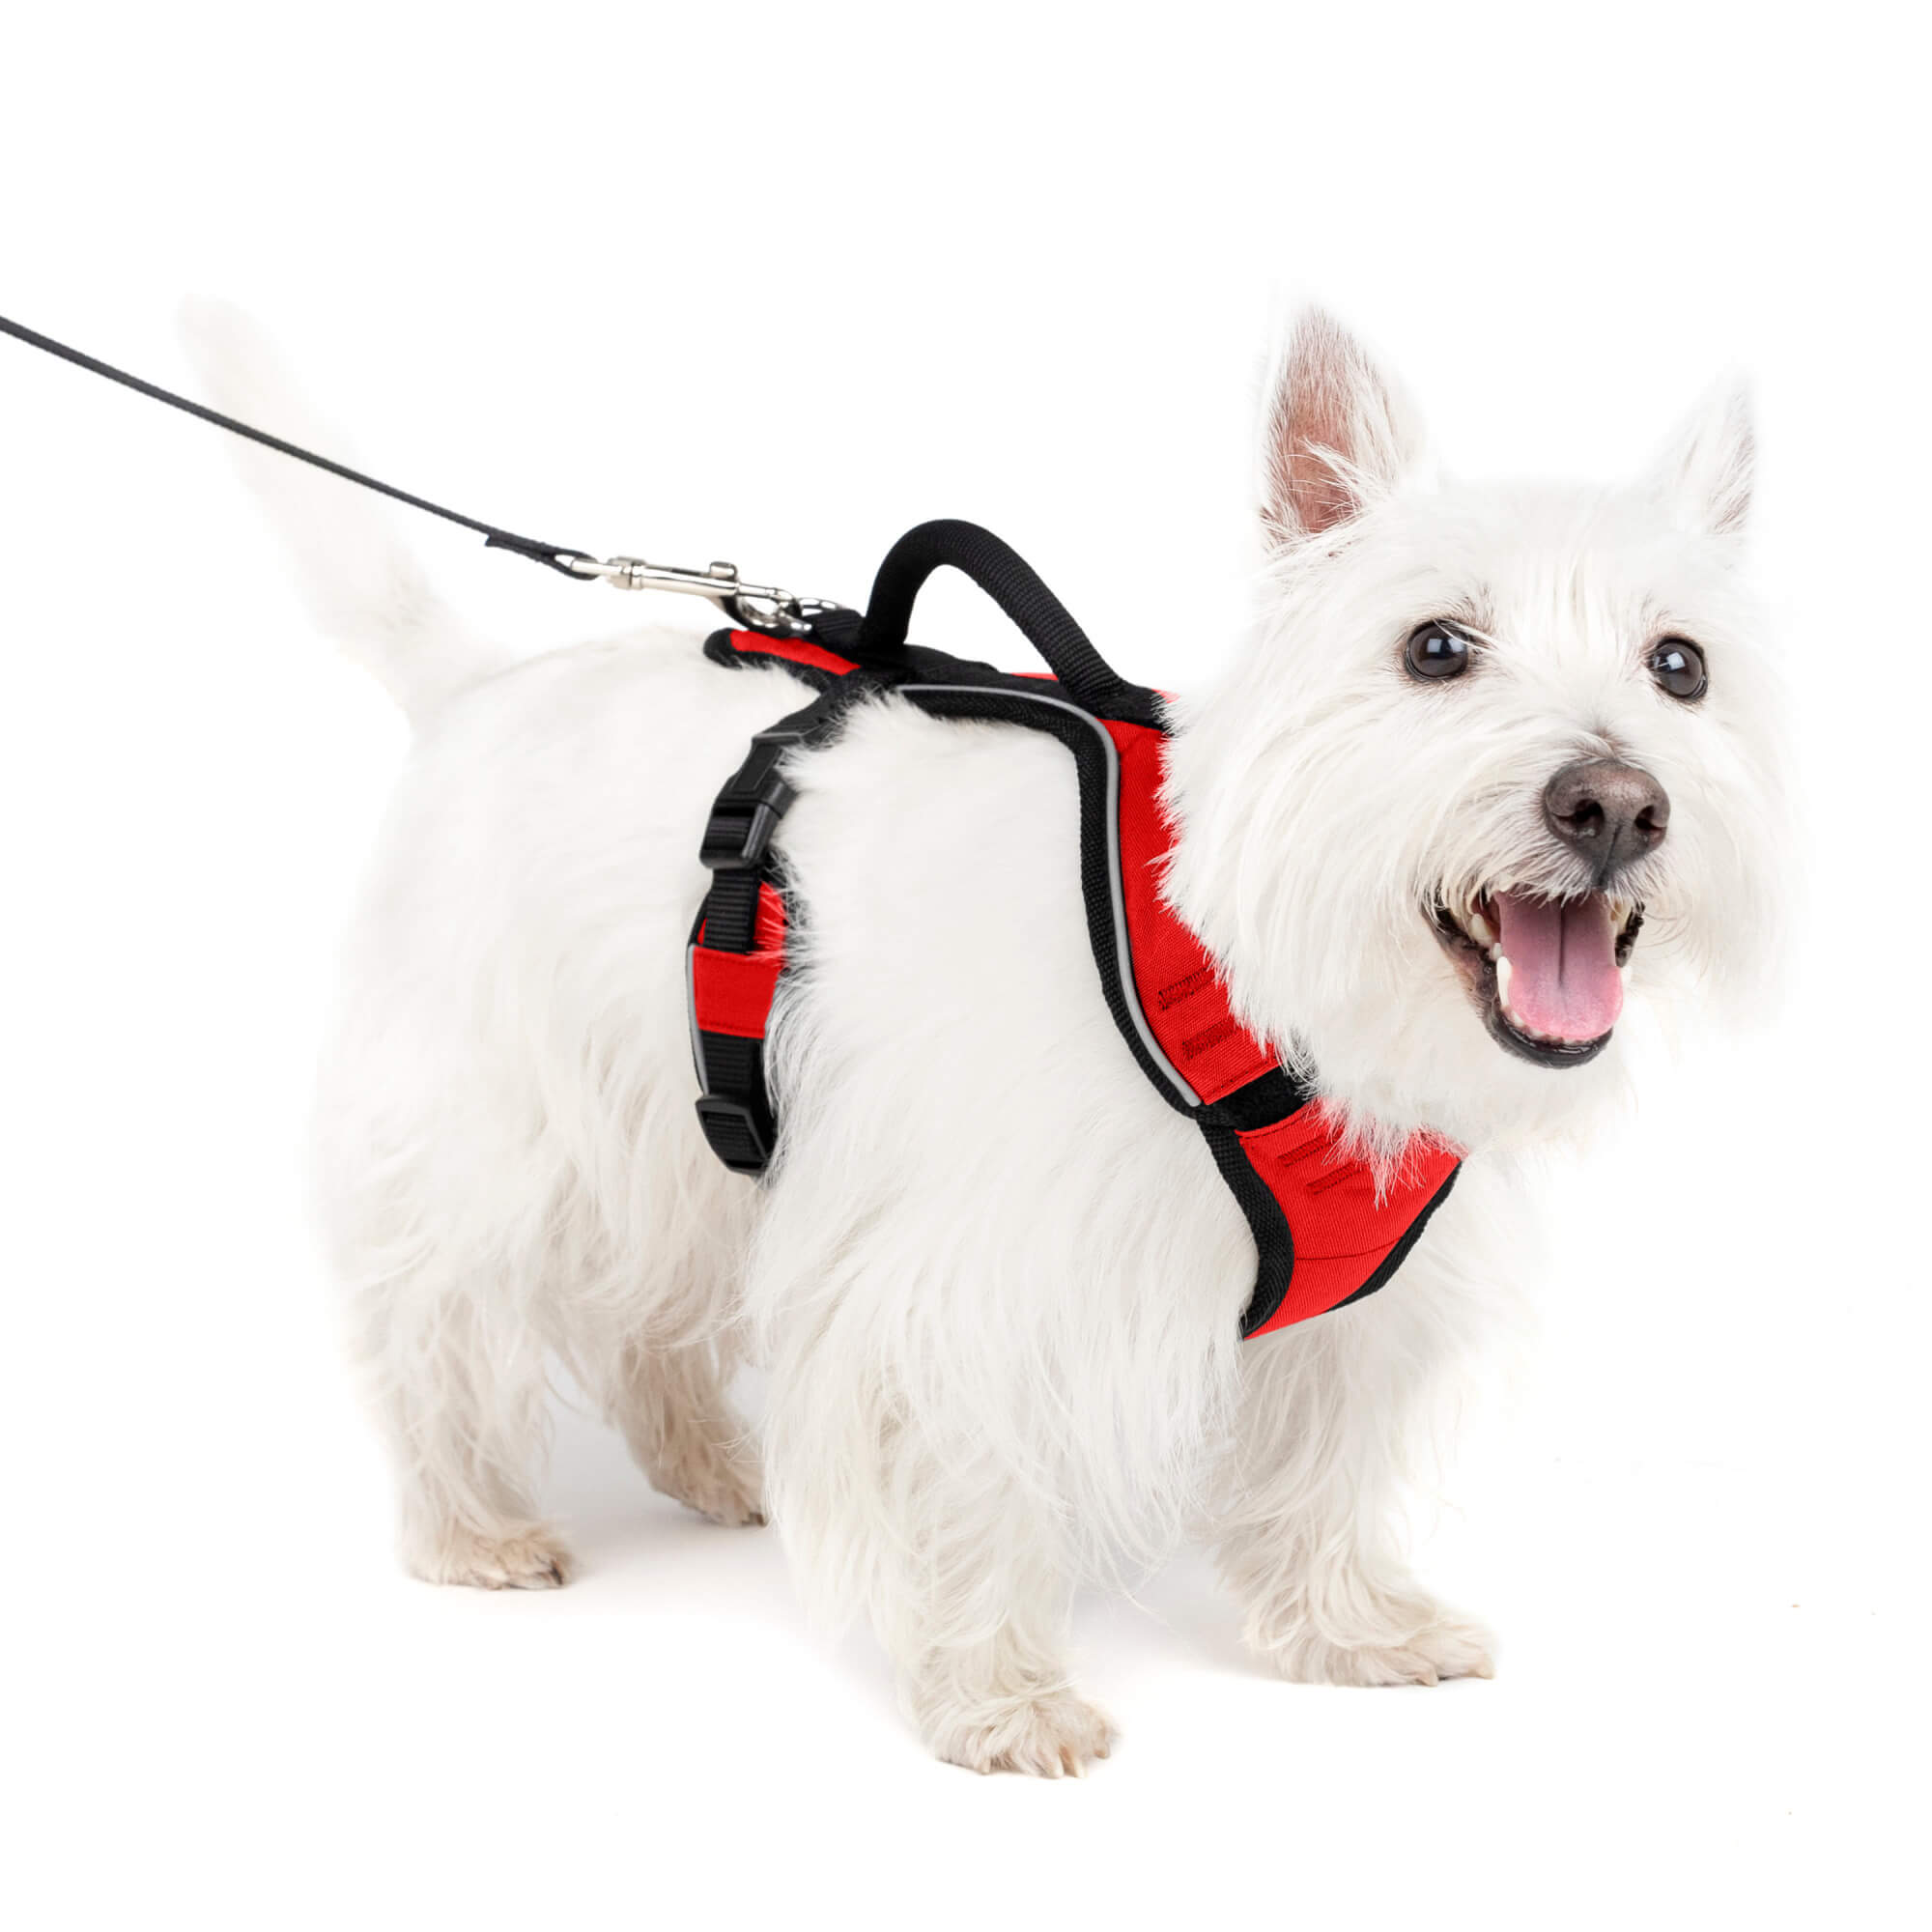 Dog wearing red petsafe easysport harness in small